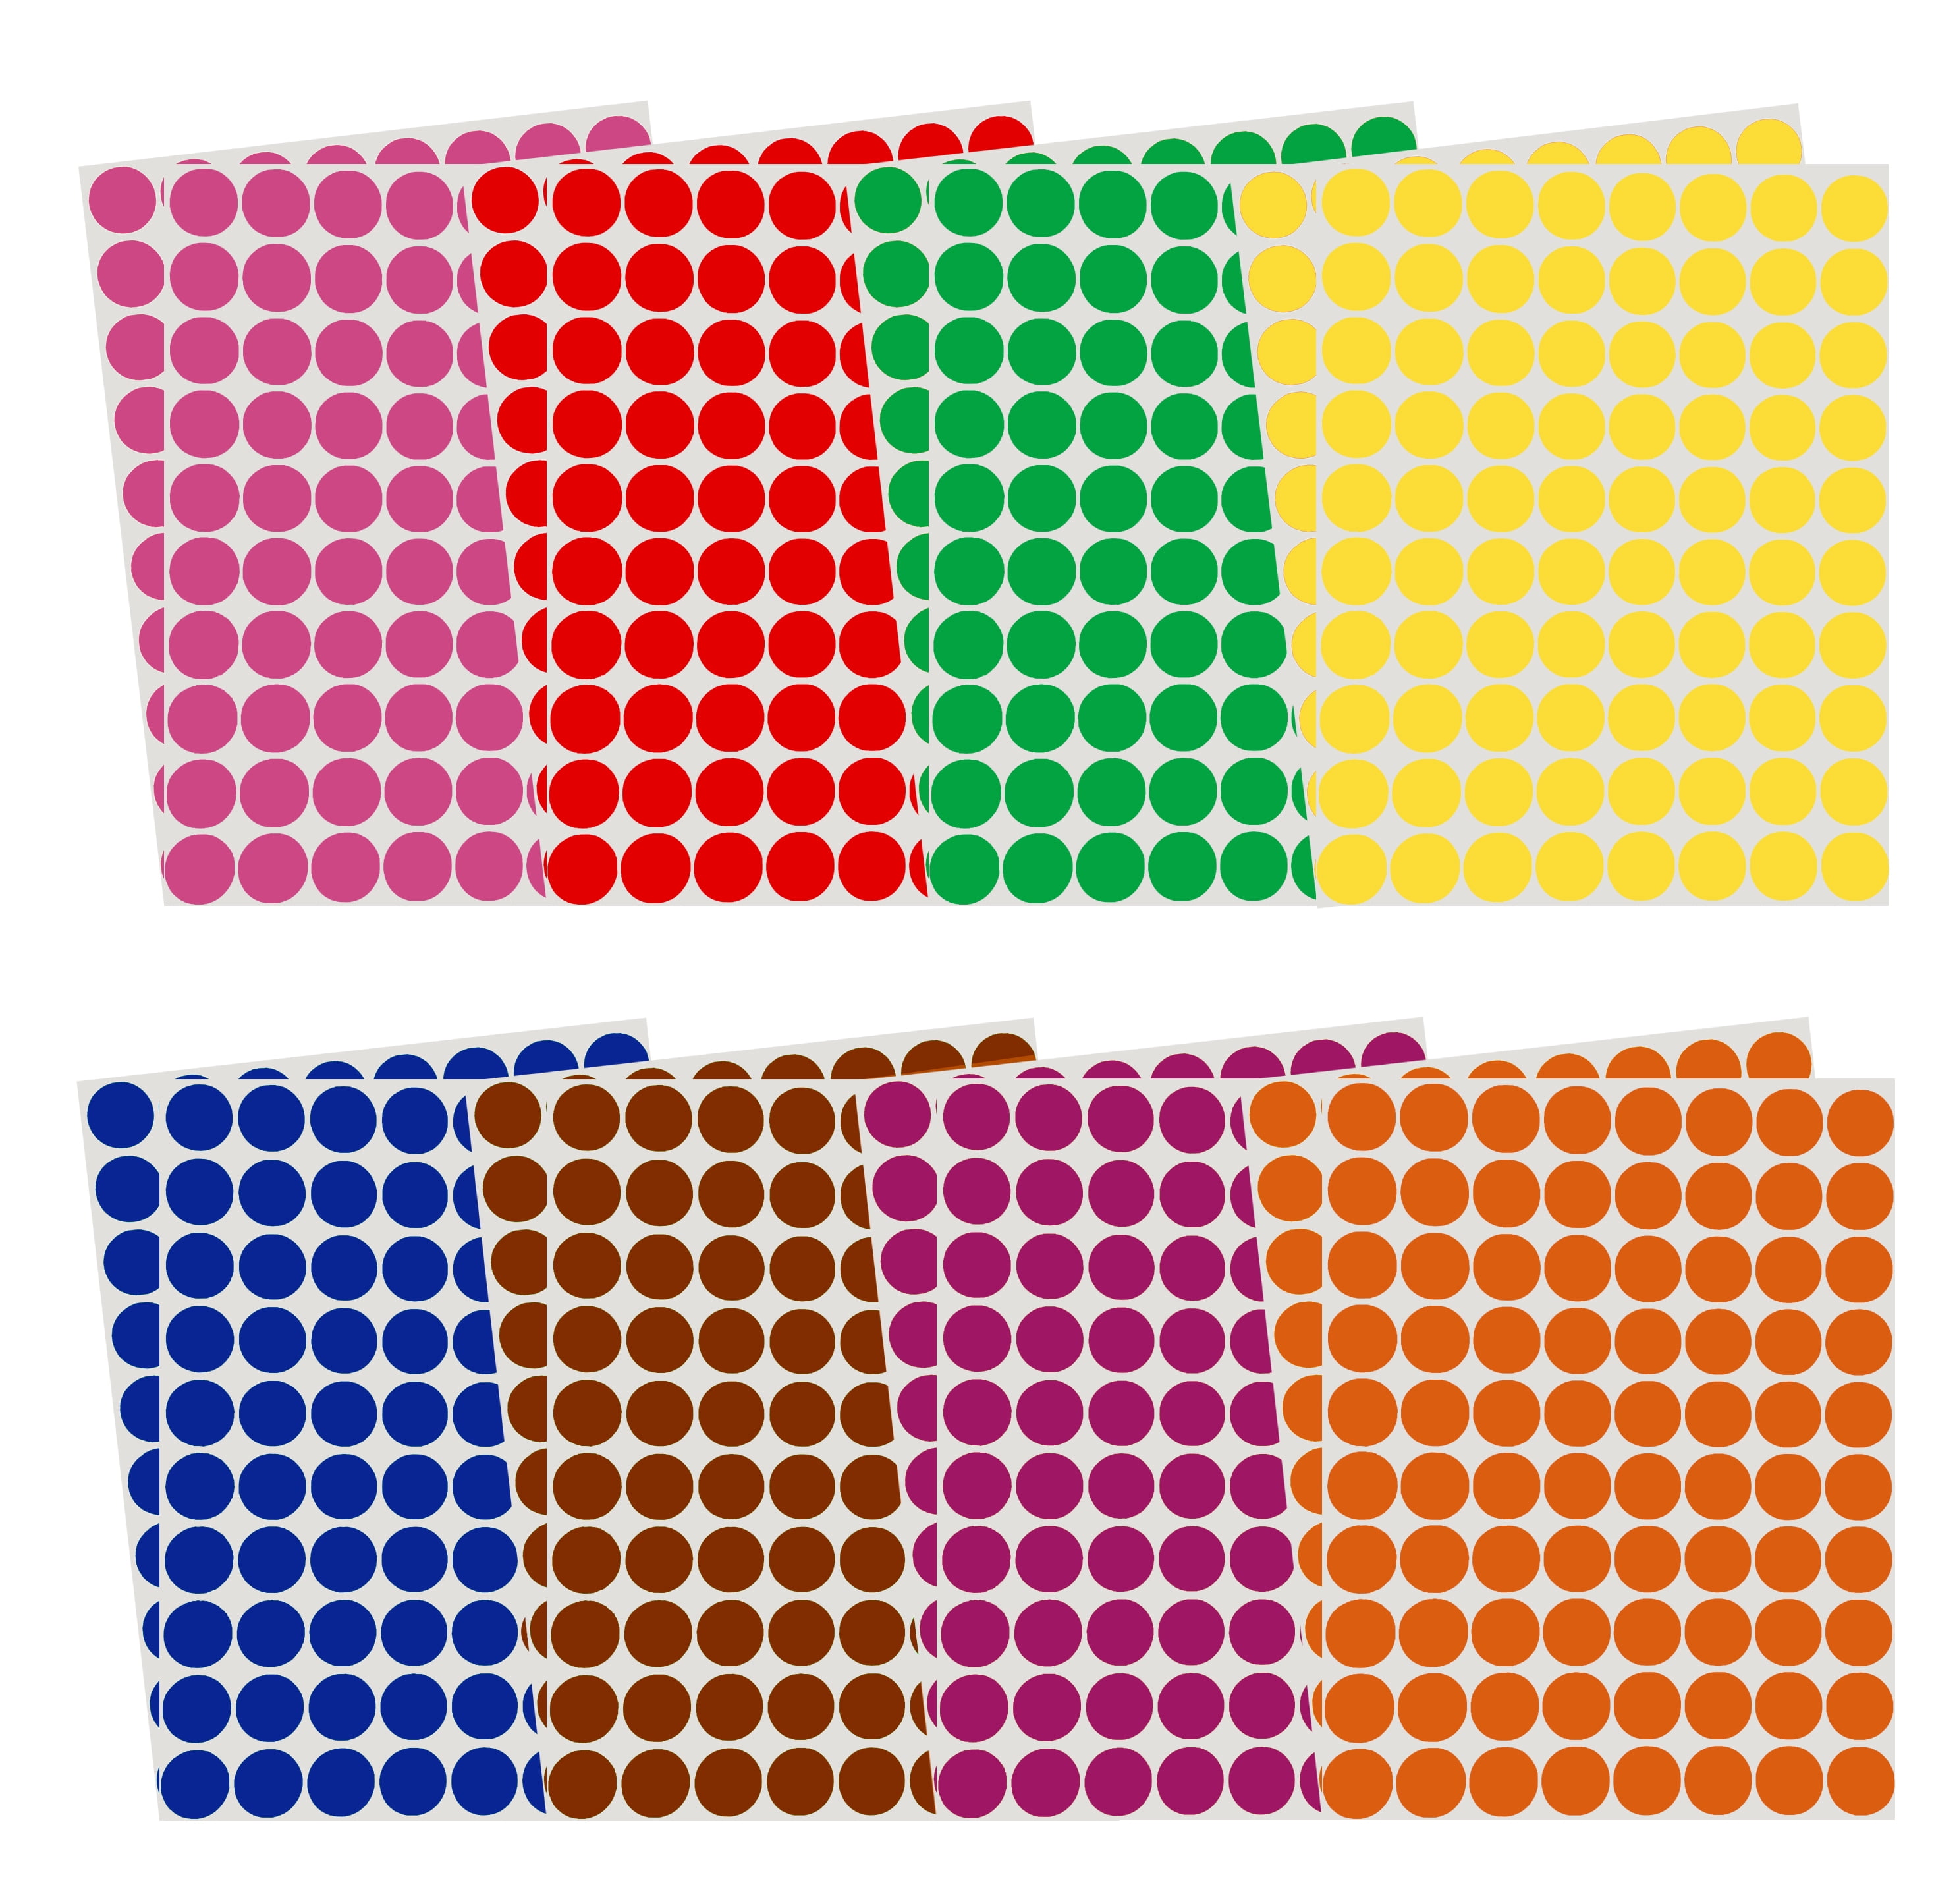 MIXED COLOUR PACK INCLUDES FREE CUSTOMISING 1000 ELECTRICAL TEST TAGS LABELS 